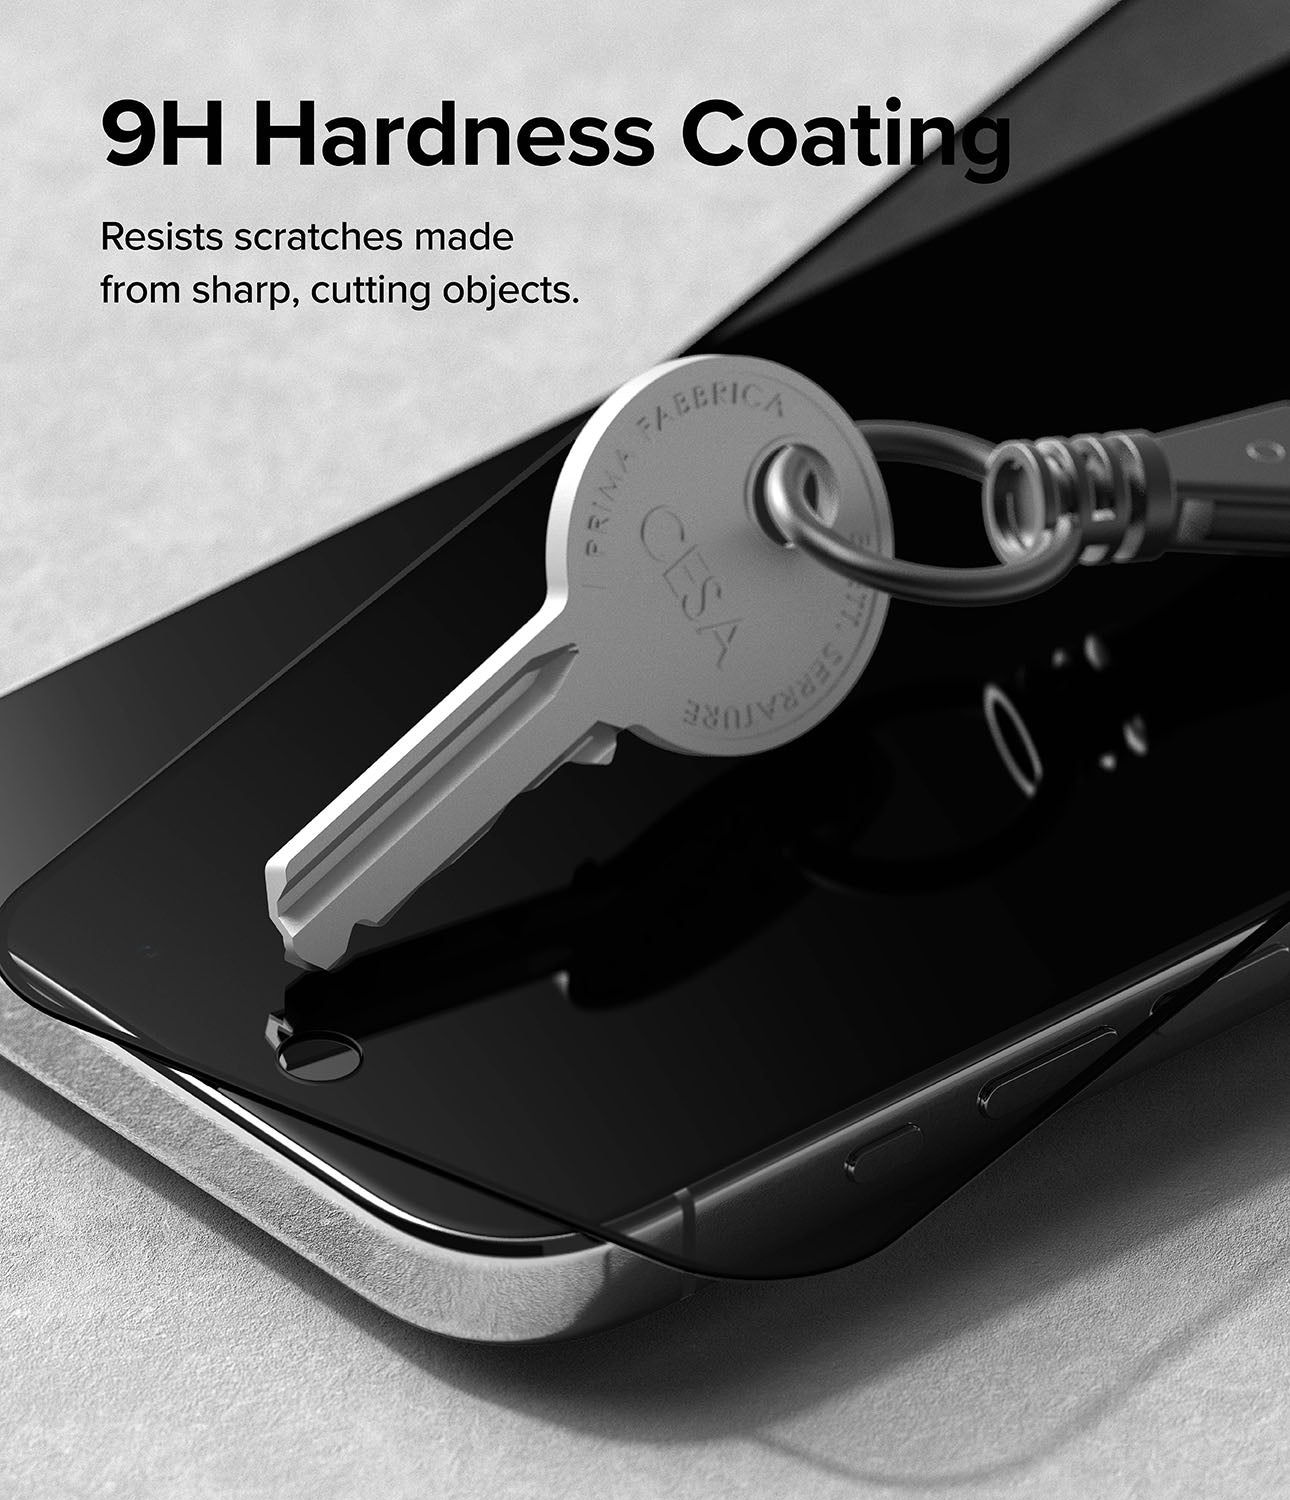 iPhone 15 Pro Screen Protector | Privacy Glass- 9H Hardness Coating. Resists scratches made from sharp, cutting objects.